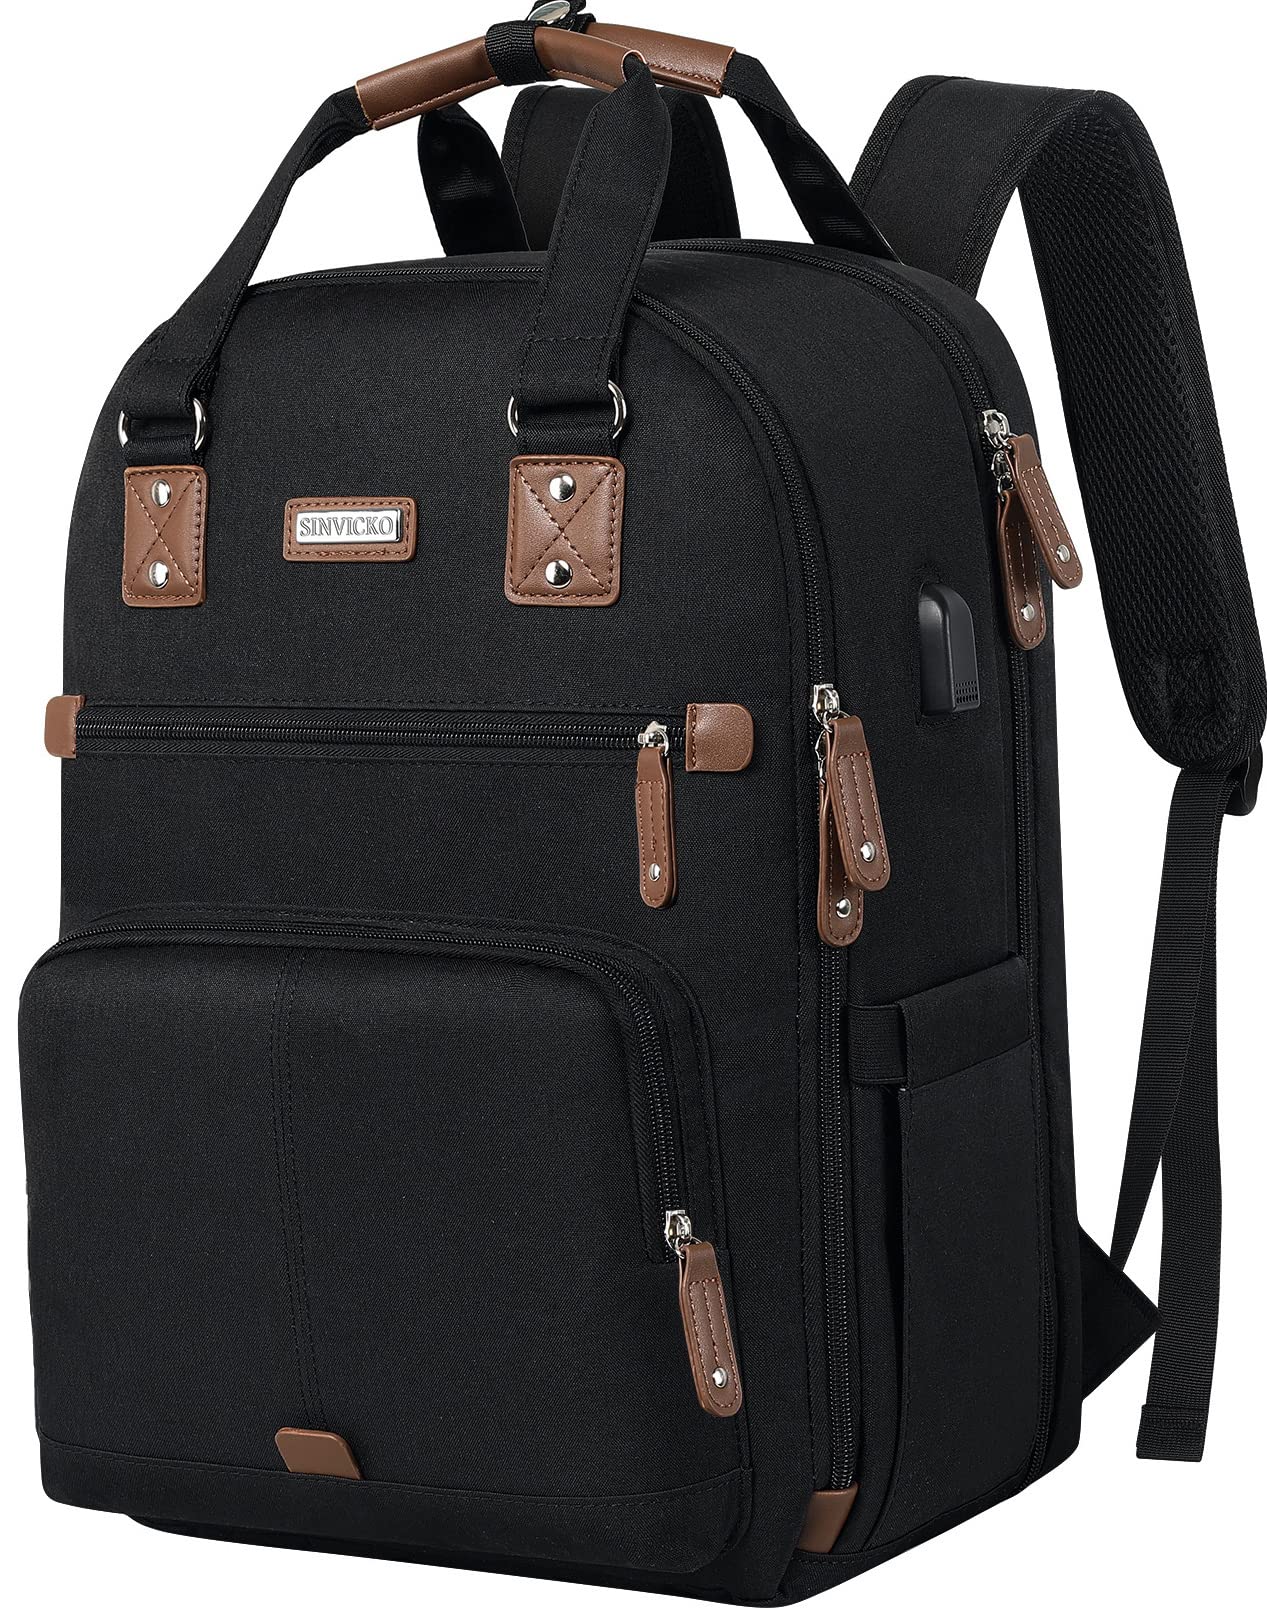 Best Backpacks with Lots of Pockets and Compartments